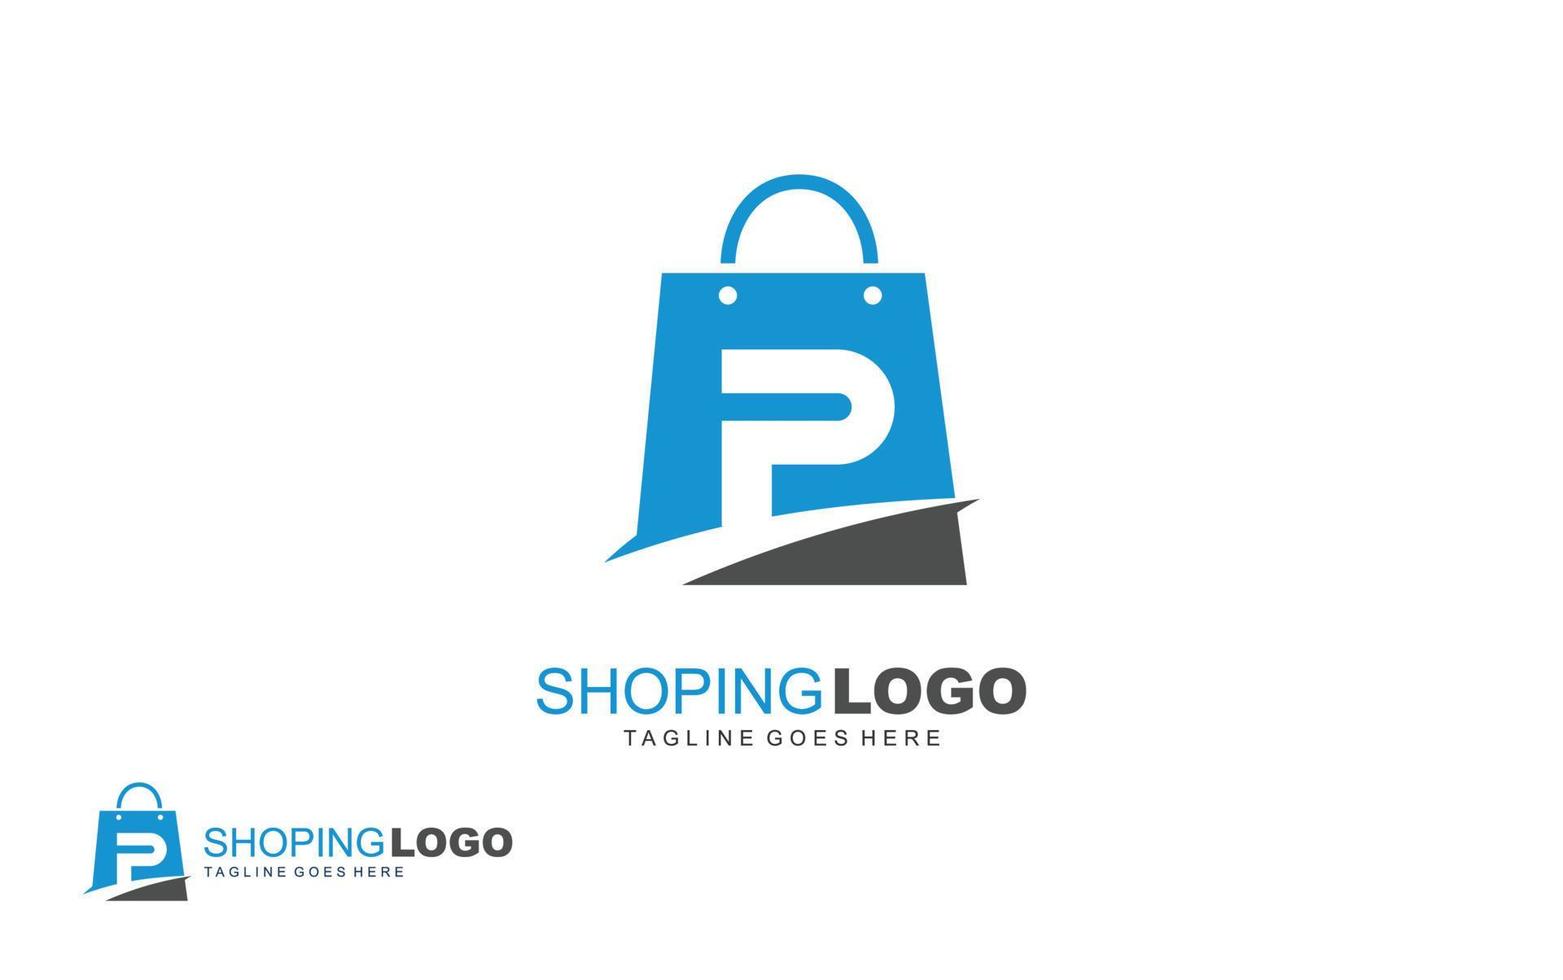 P logo ONLINESHOP for branding company. BAG template vector illustration for your brand.